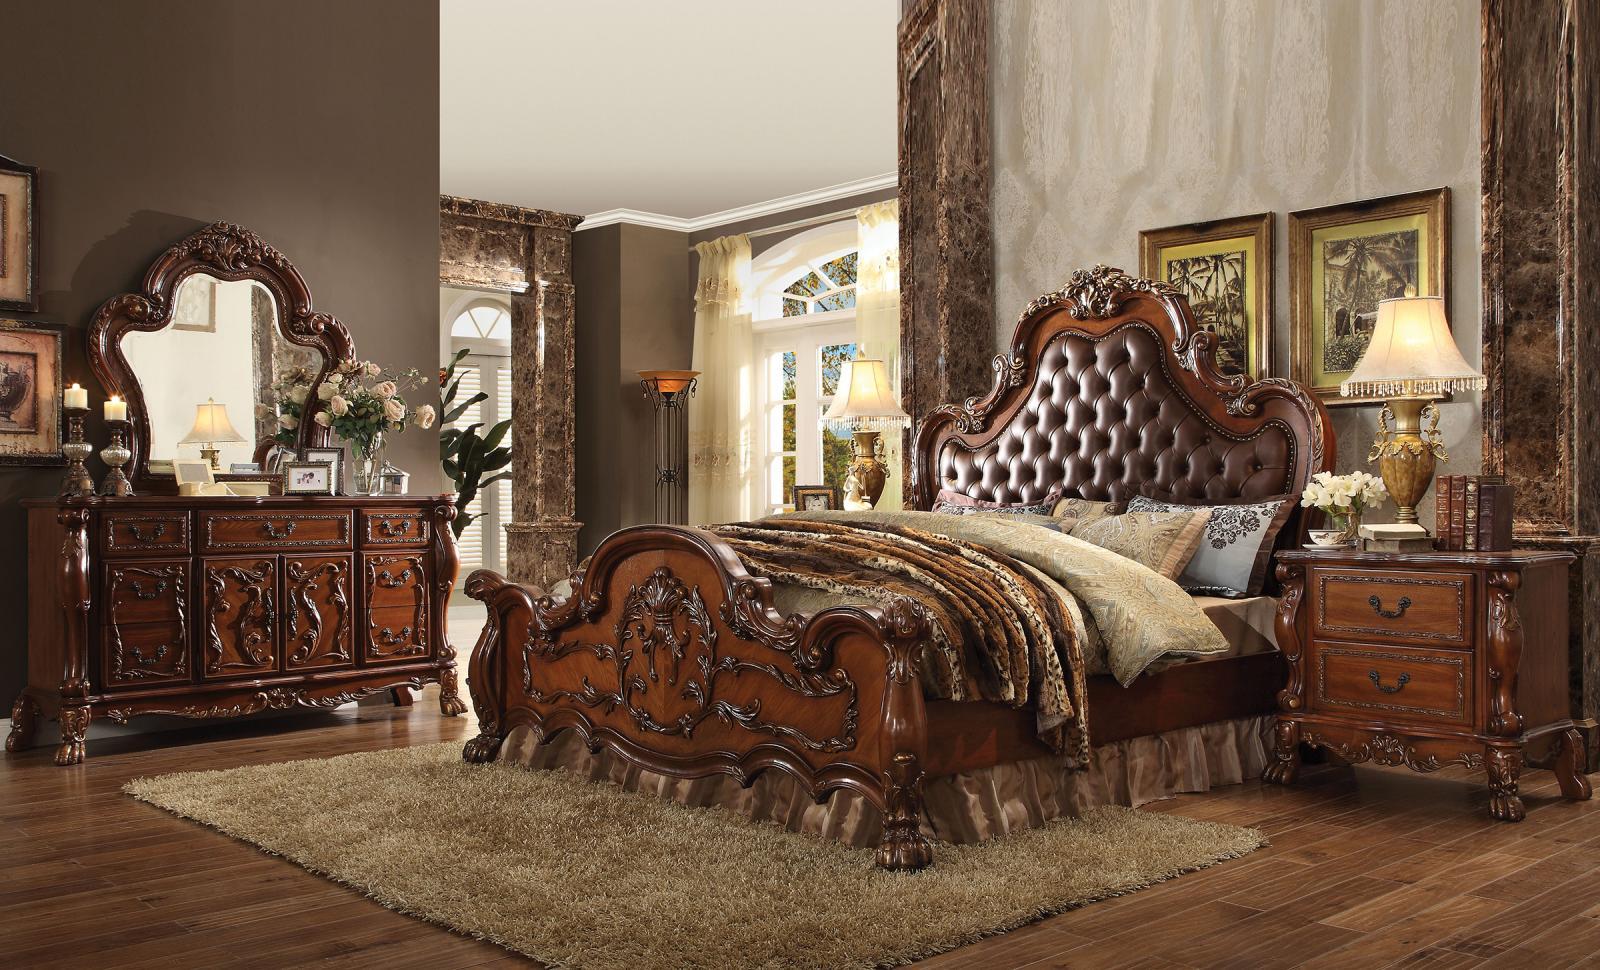 

    
Luxury Tufted PU Cherry Oak Perales King Bedroom Set 4 Traditional Carved Wood
